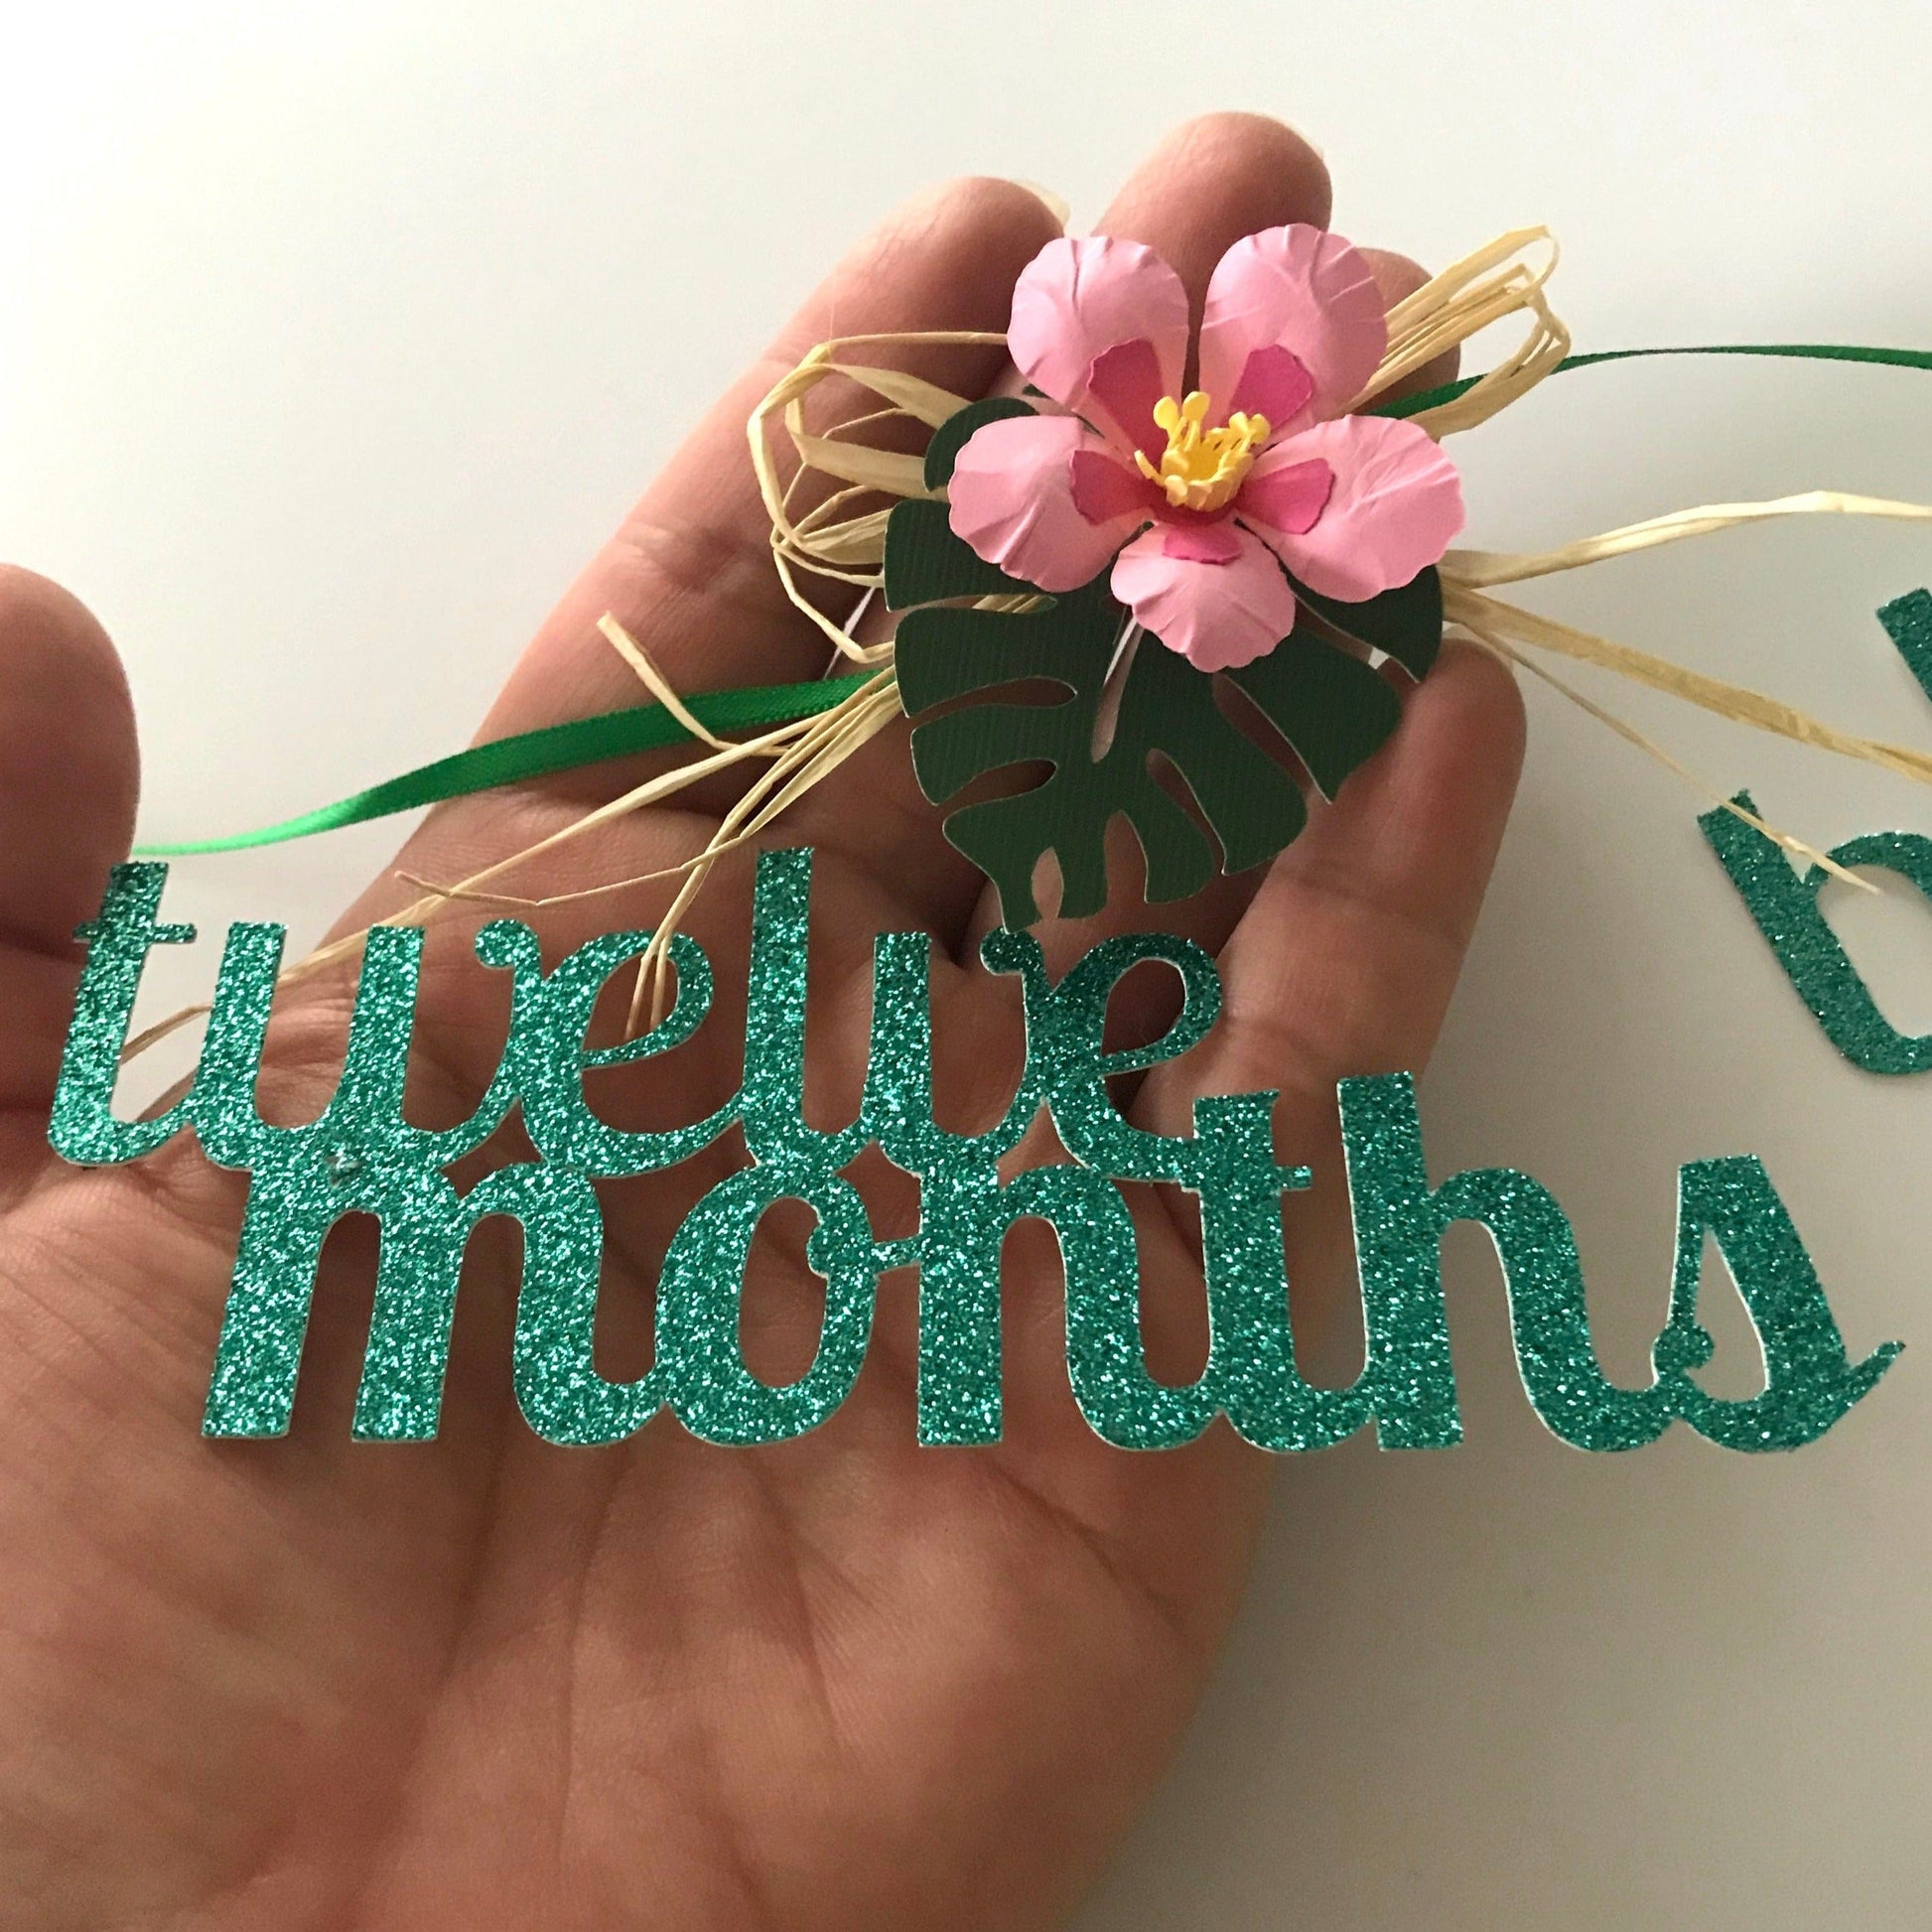 Adriana Ortiz Designs Garland New born to 12 months photo banner, first birthday for tropical theme party.